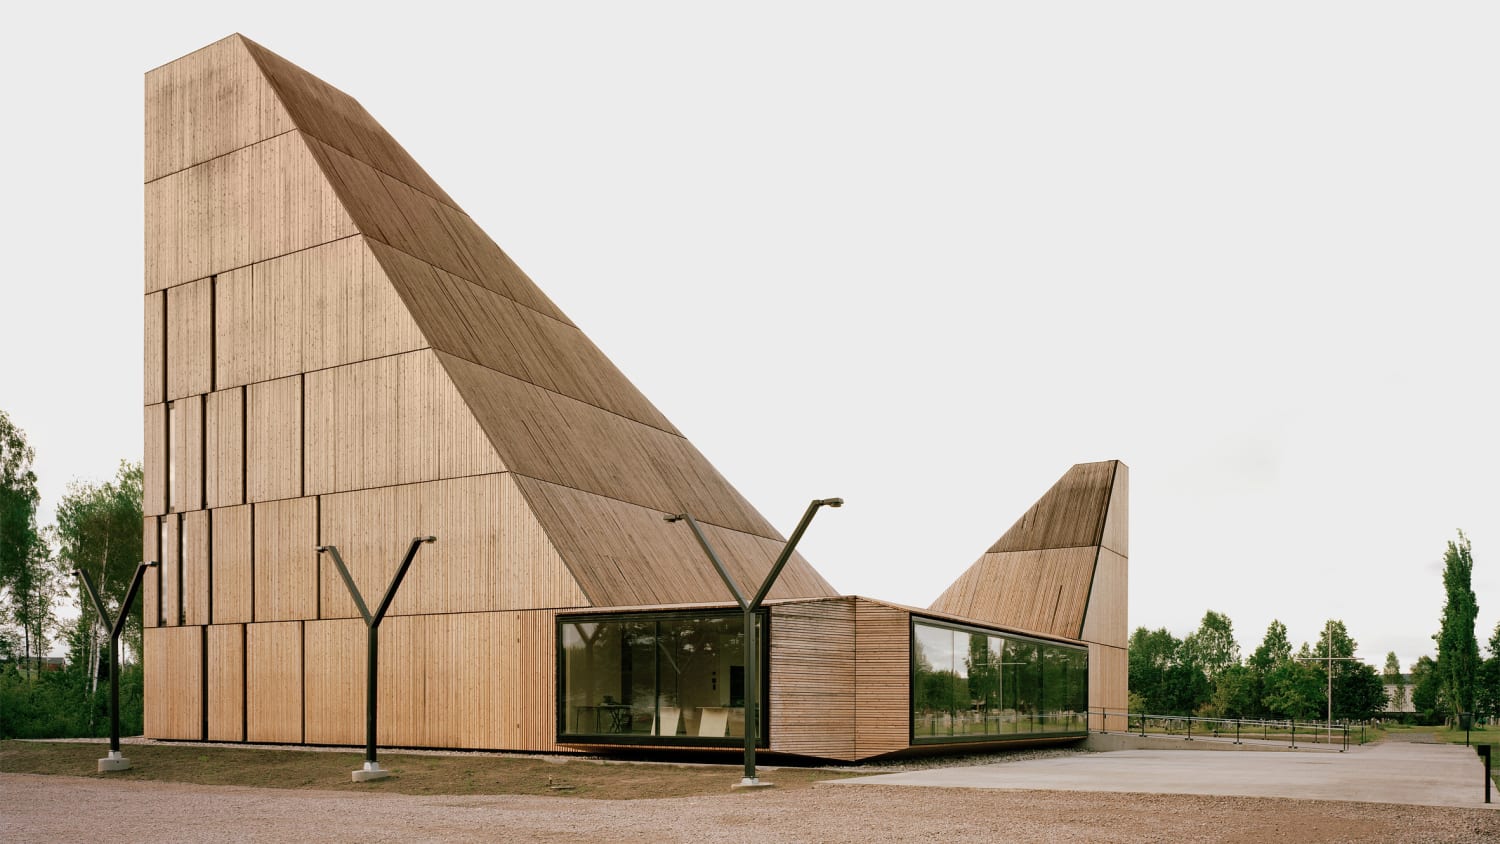 Angular roofs top timber church designed to evoke its lost predecessor